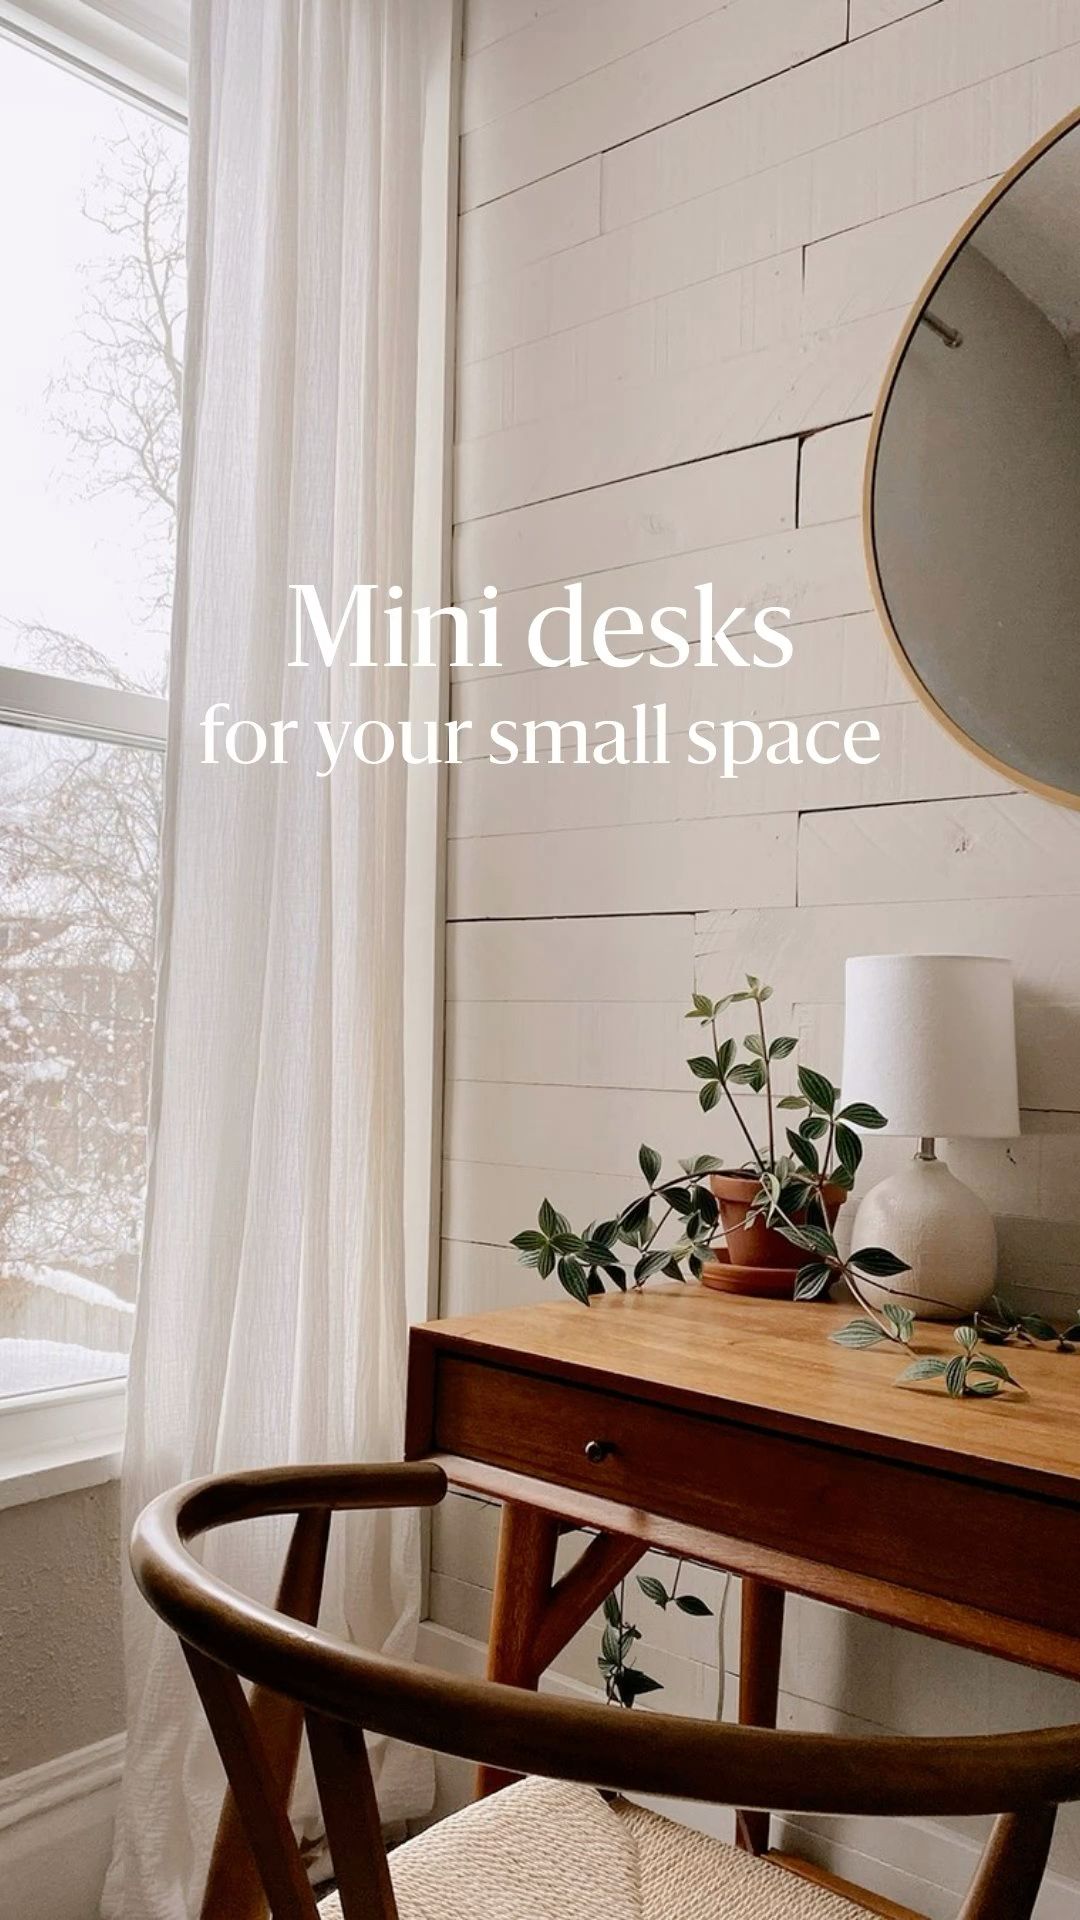 Mini desks for your small space!